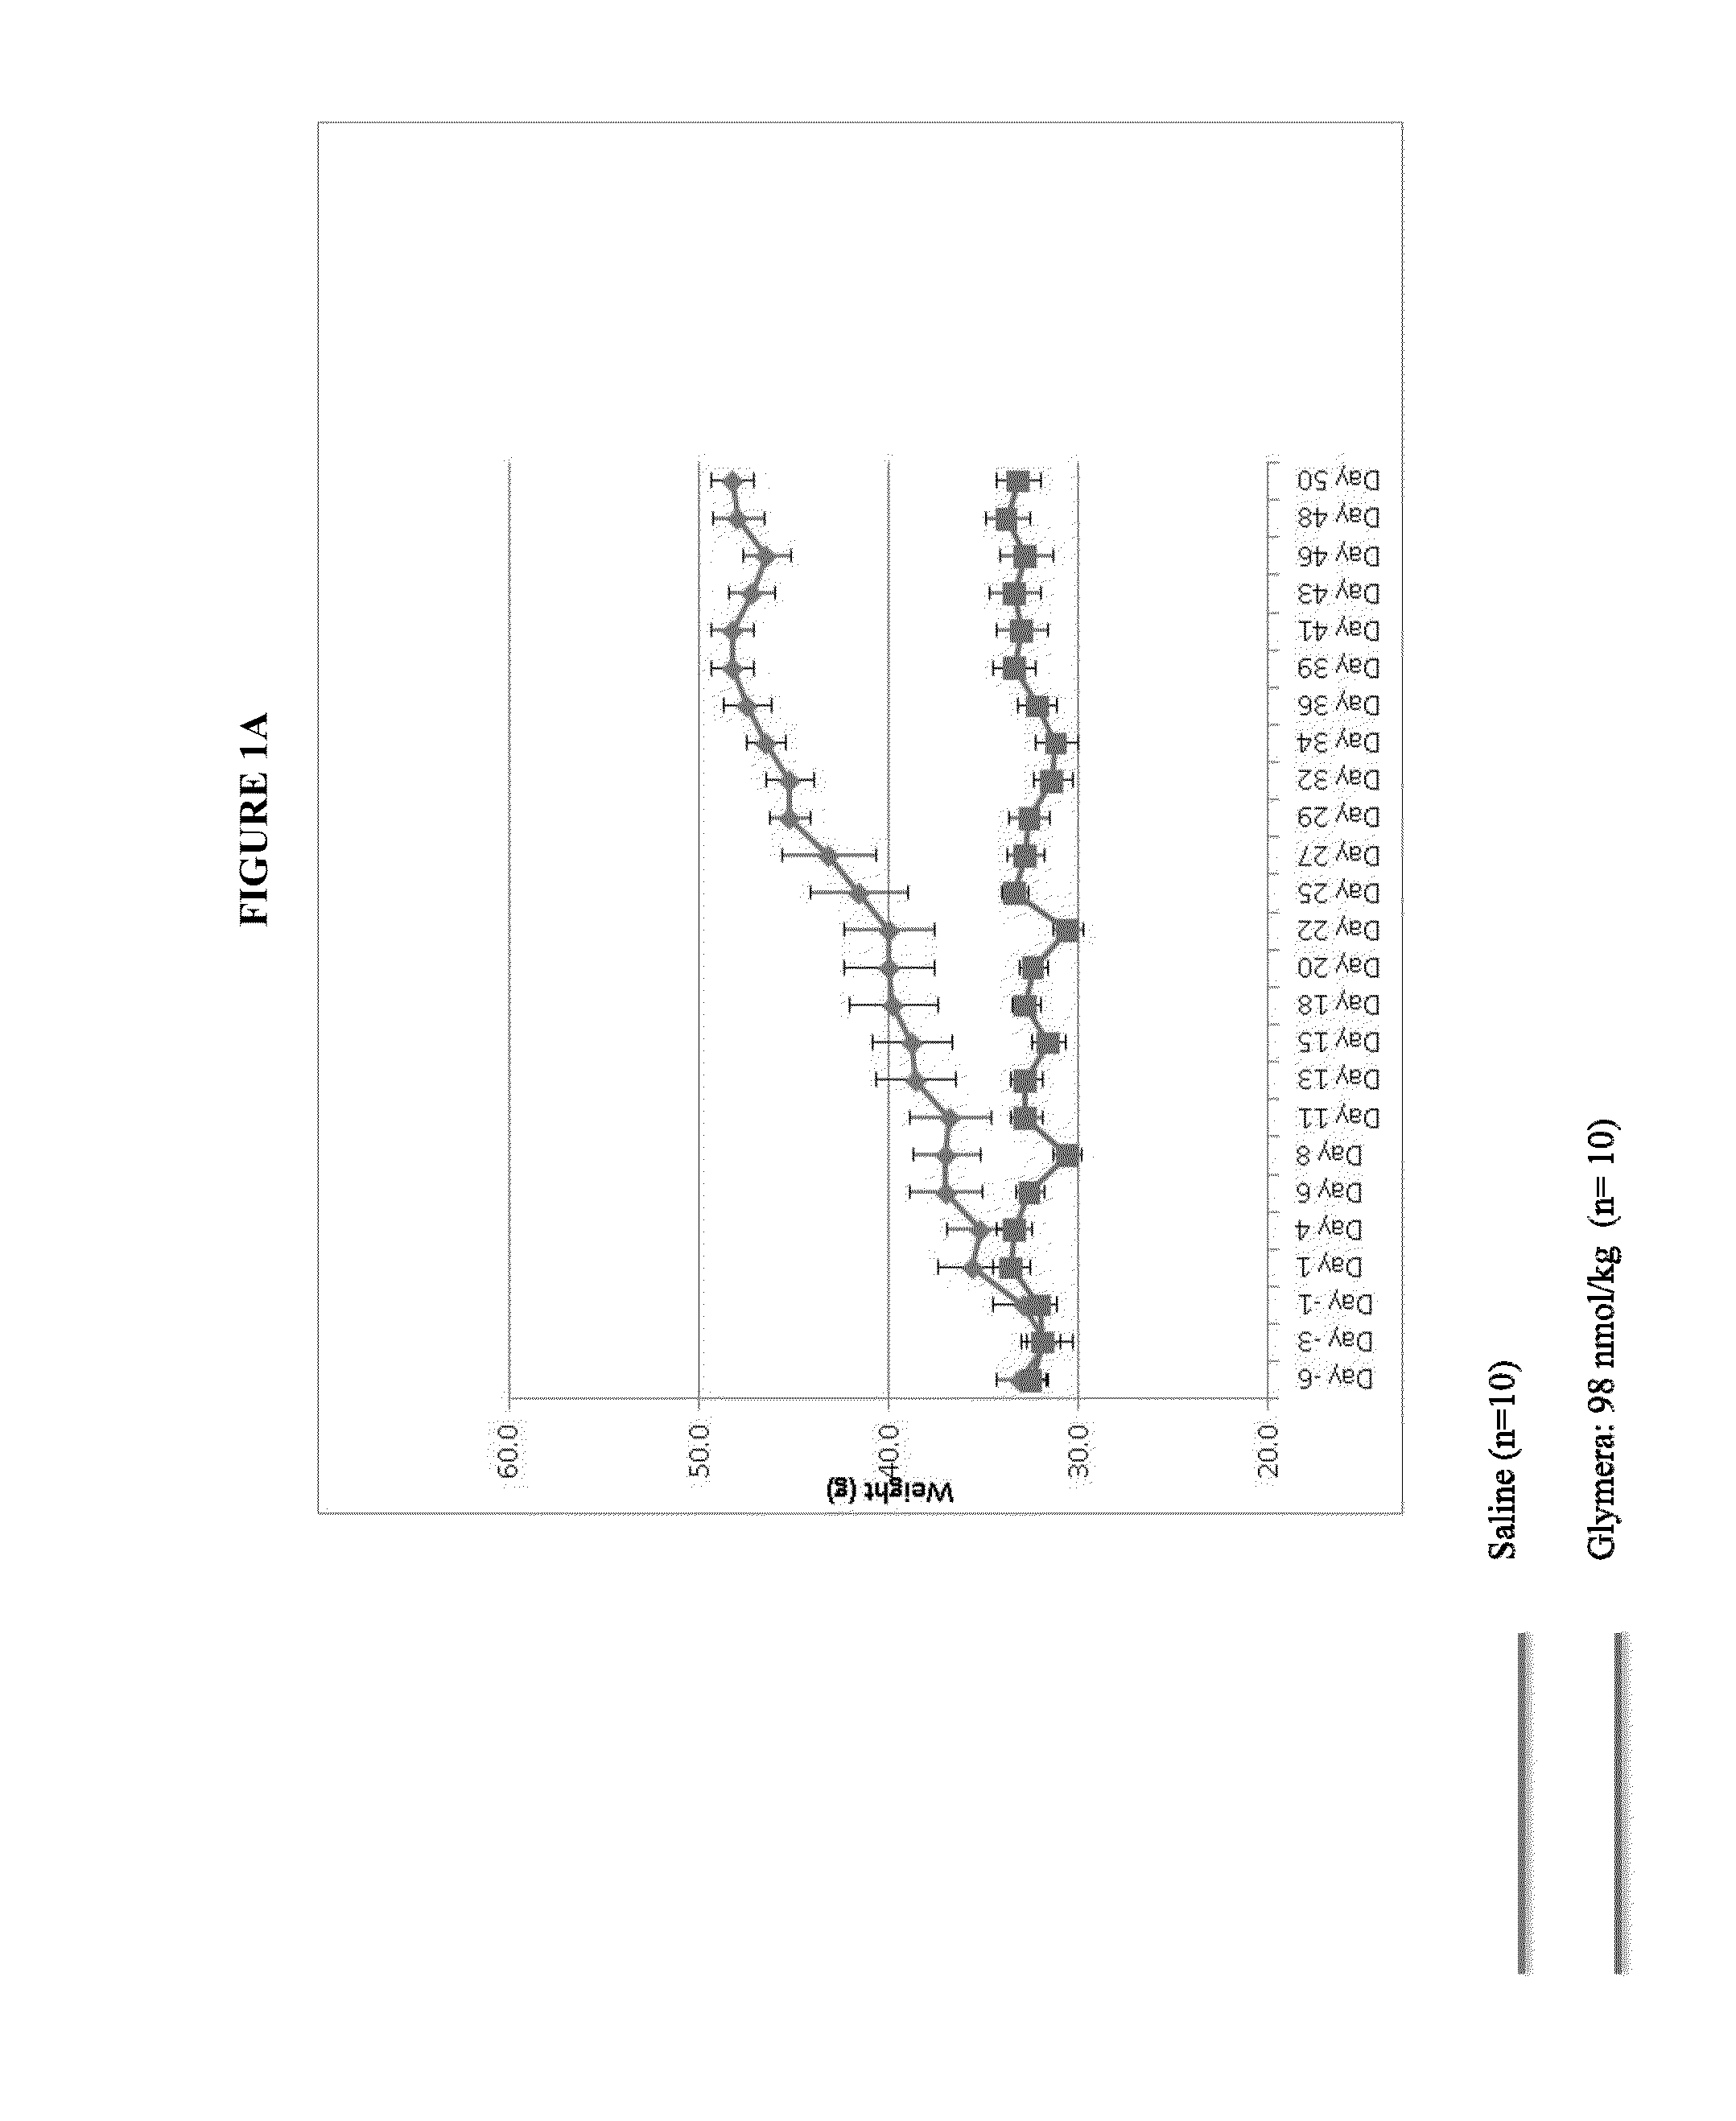 Methods of treatment with glp-1 receptor agonists